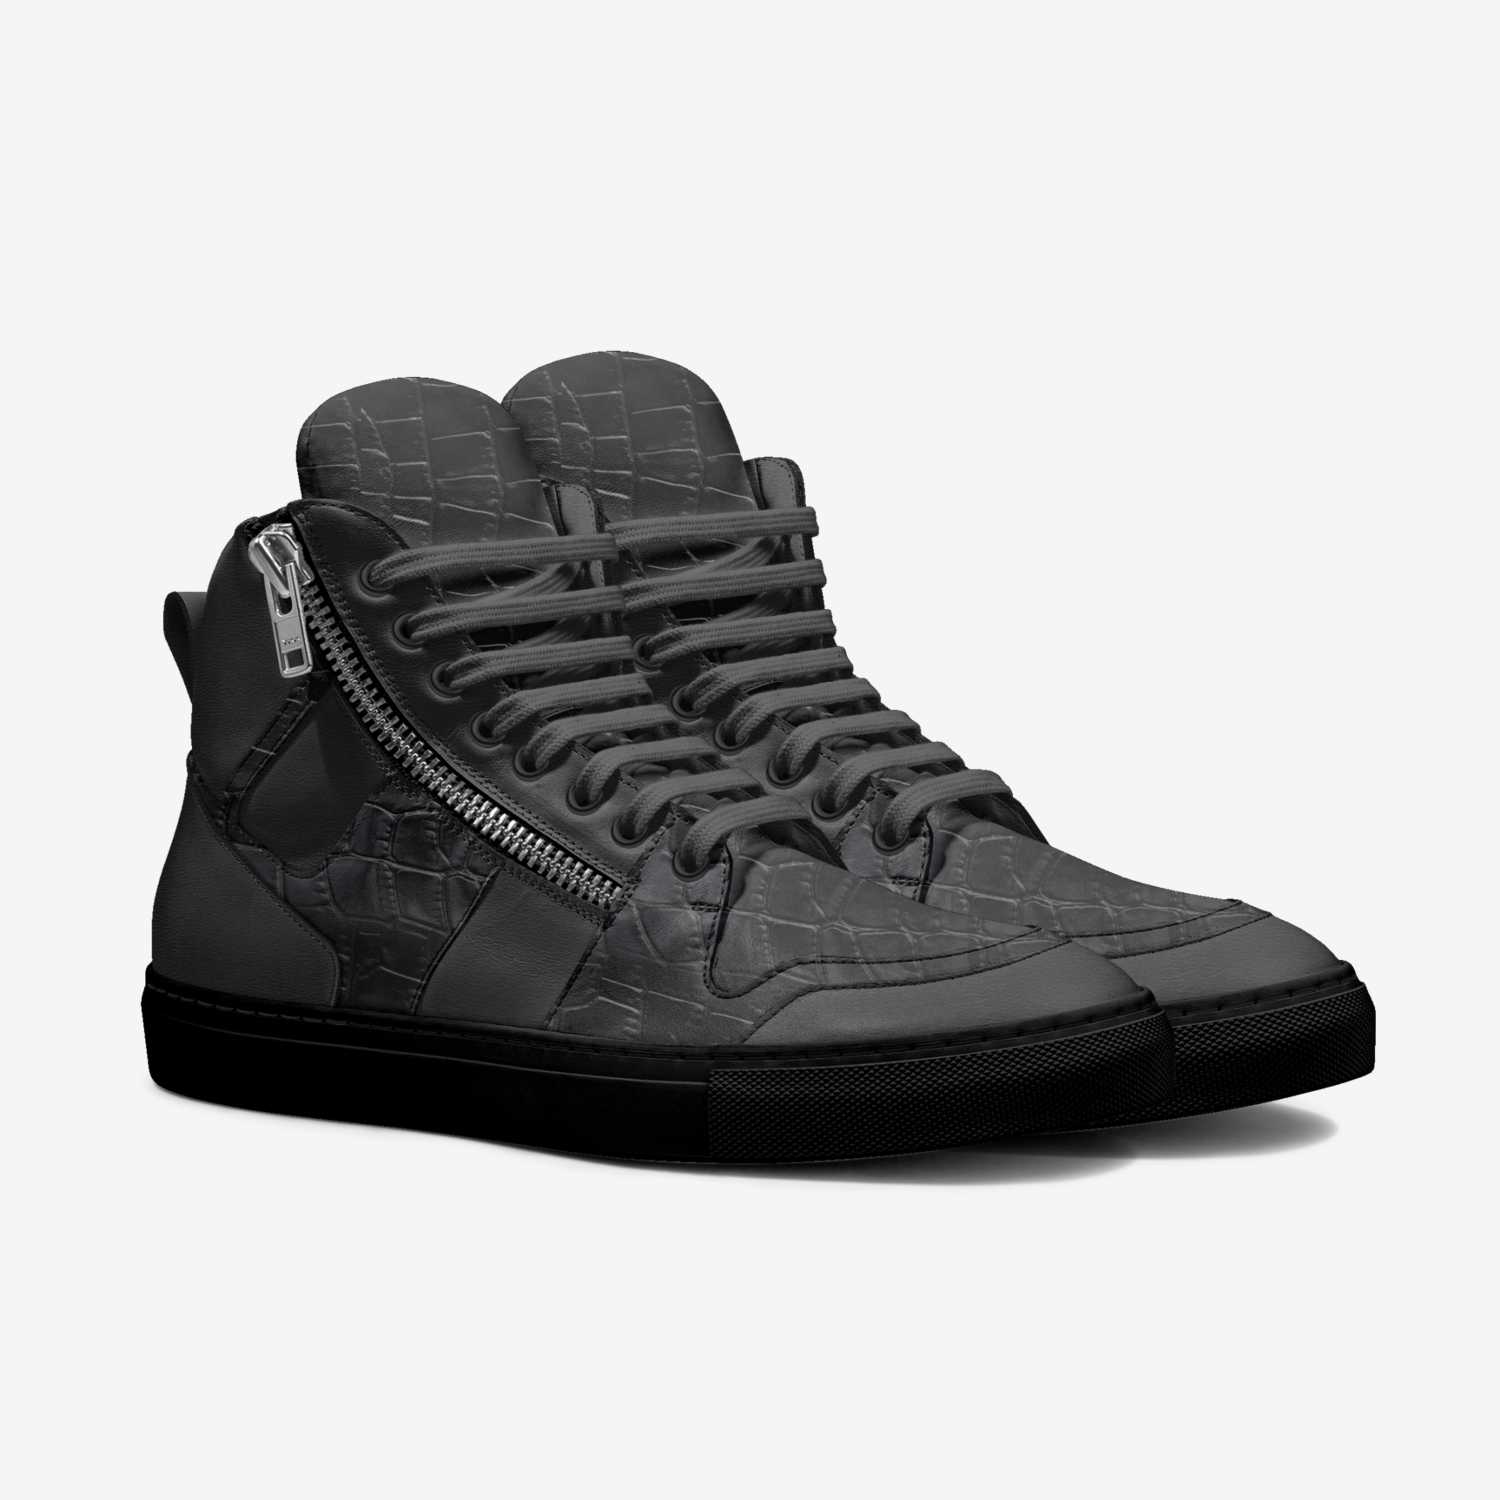 J3 Elite Black  custom made in Italy shoes by Javis Hall | Box view